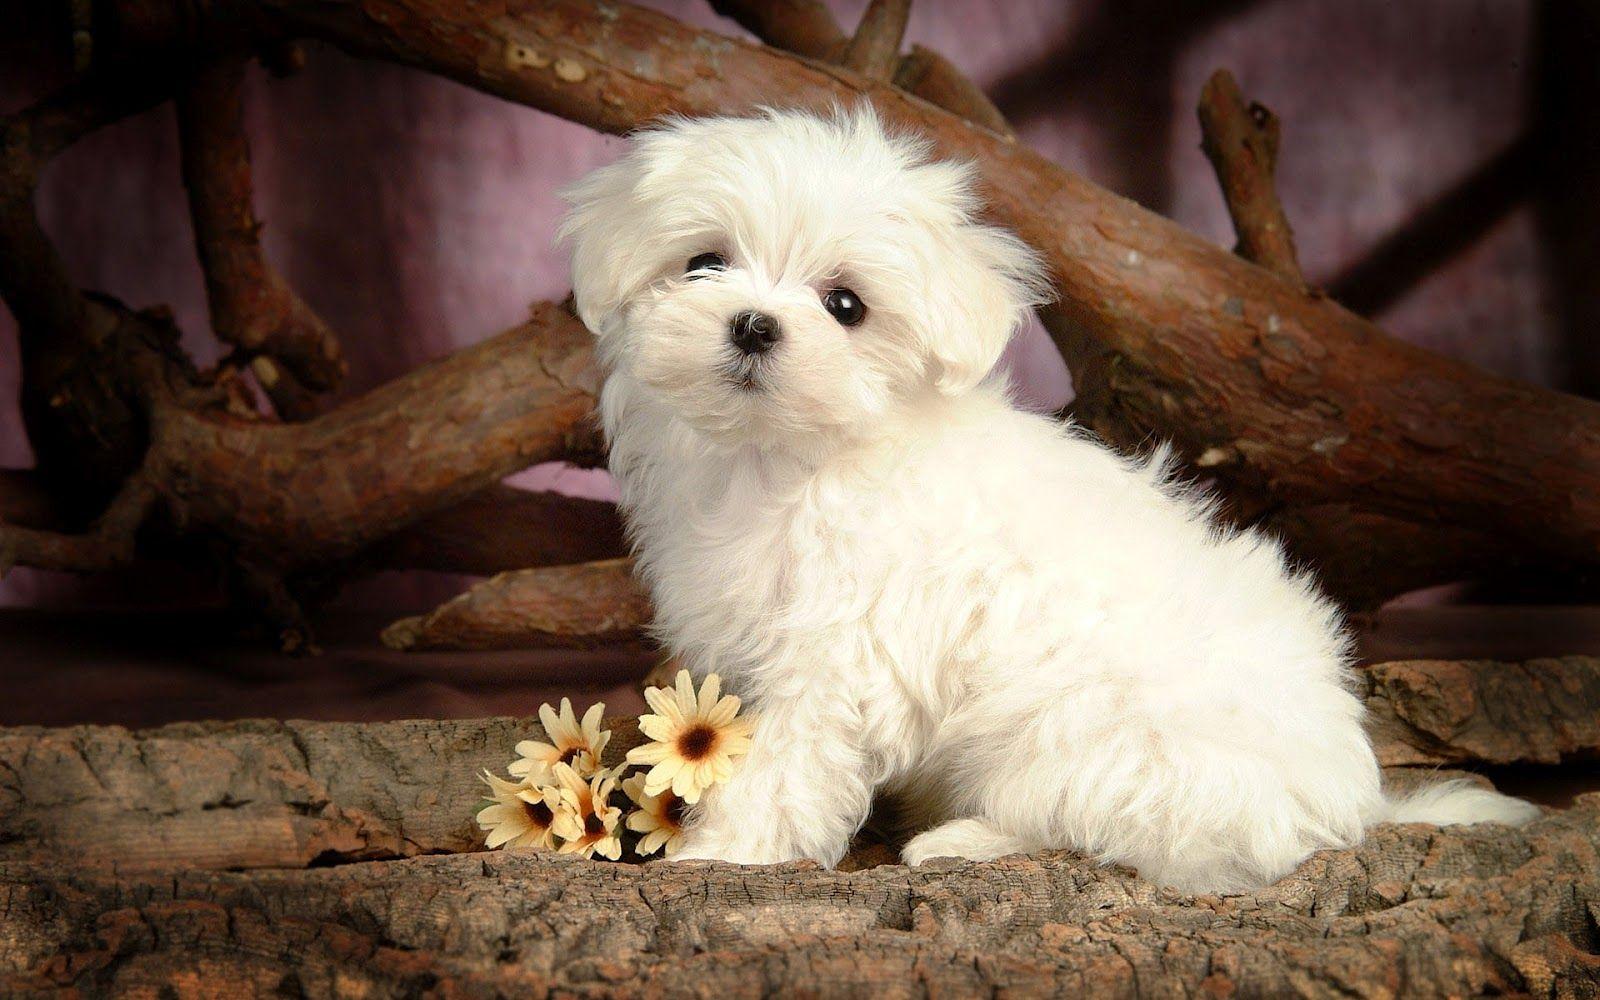 Dog Breeds Wallpapers - Wallpaper Cave